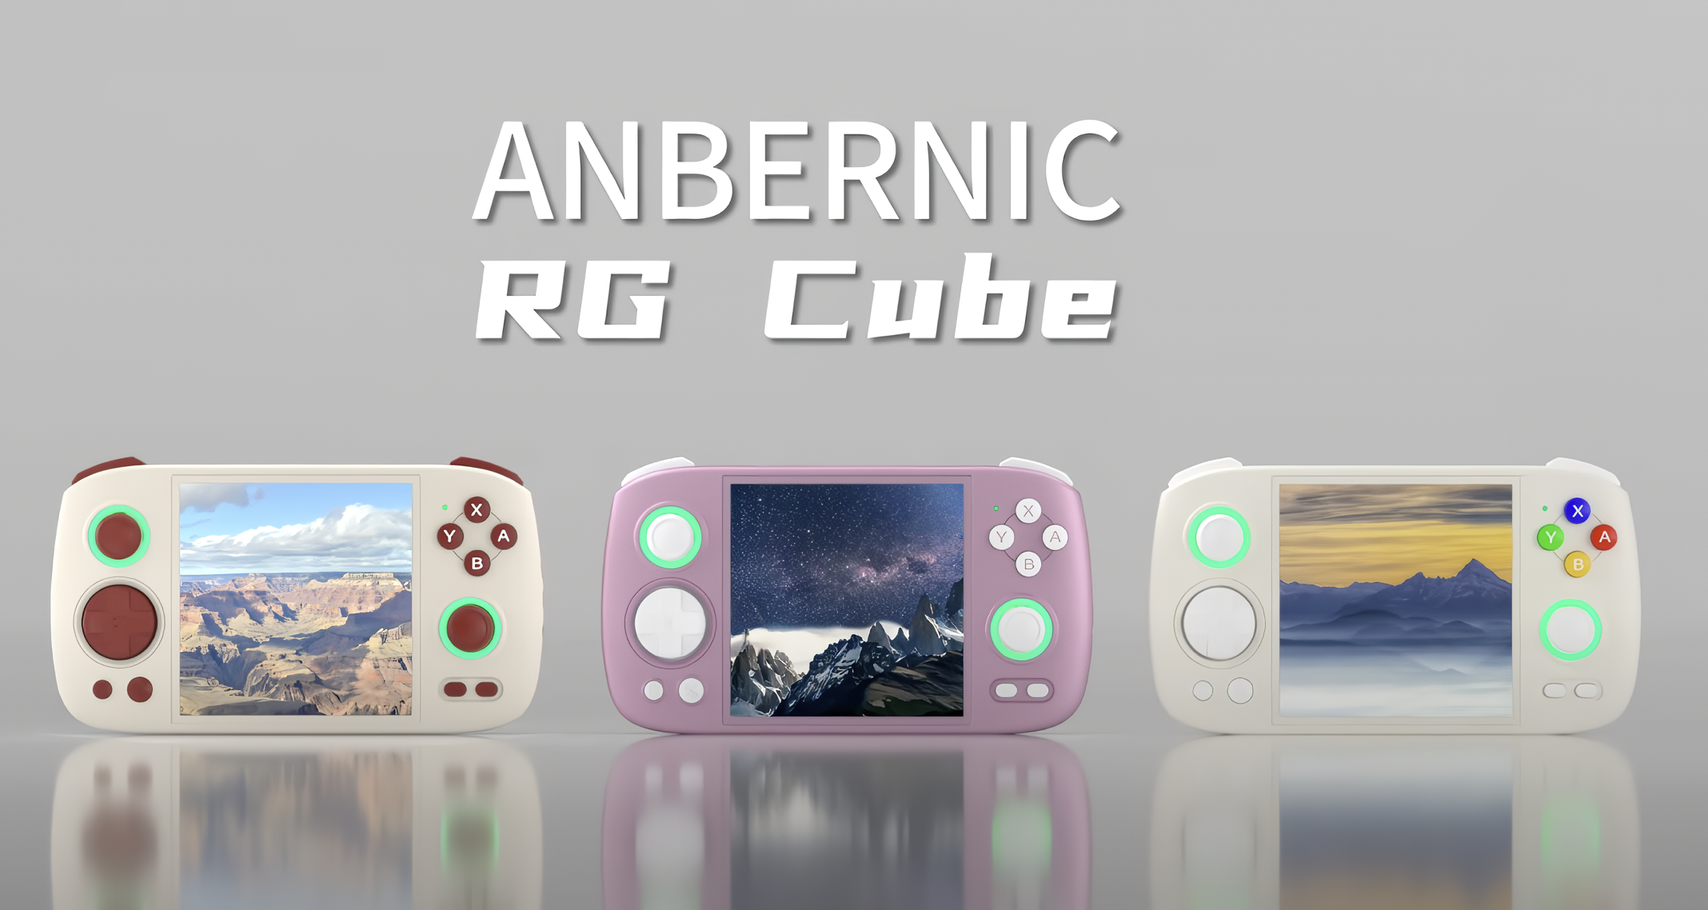 The Anbernic RG Cube gaming console for retro gaming enthusiasts has been unveiled